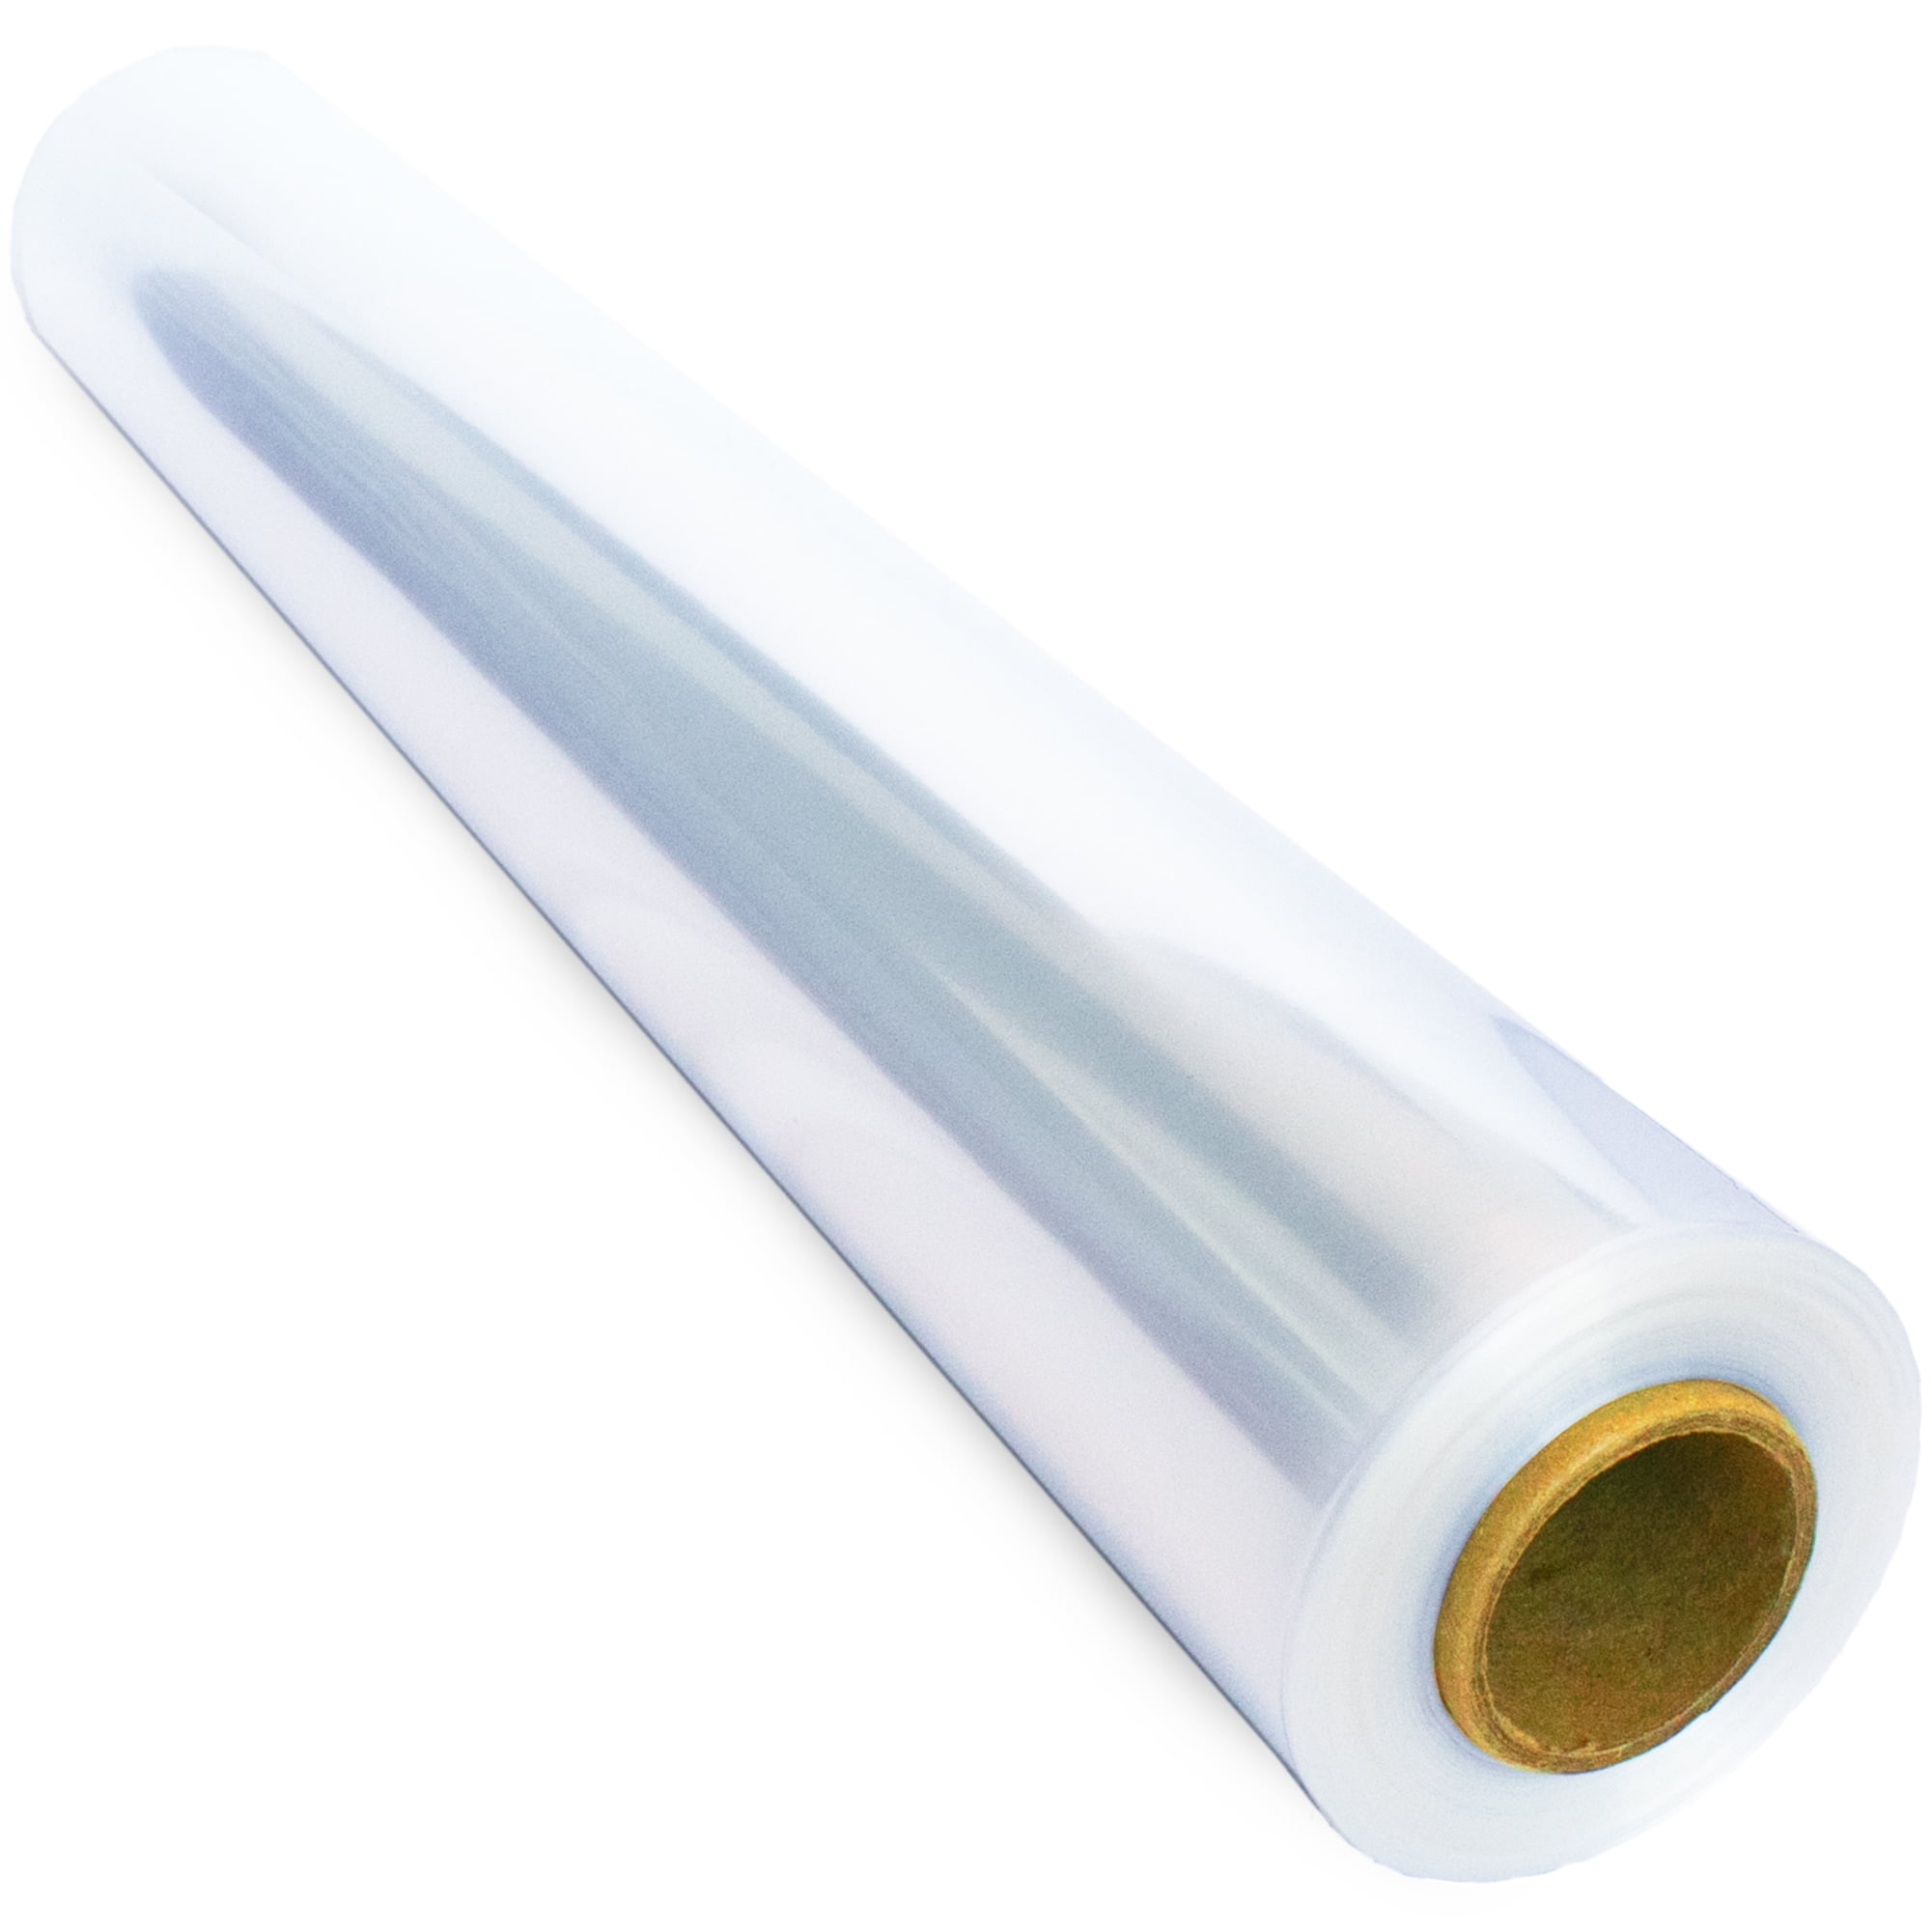 1pc Cellophane Wrap Roll Clear Cellophane Paper Gift Wrapping